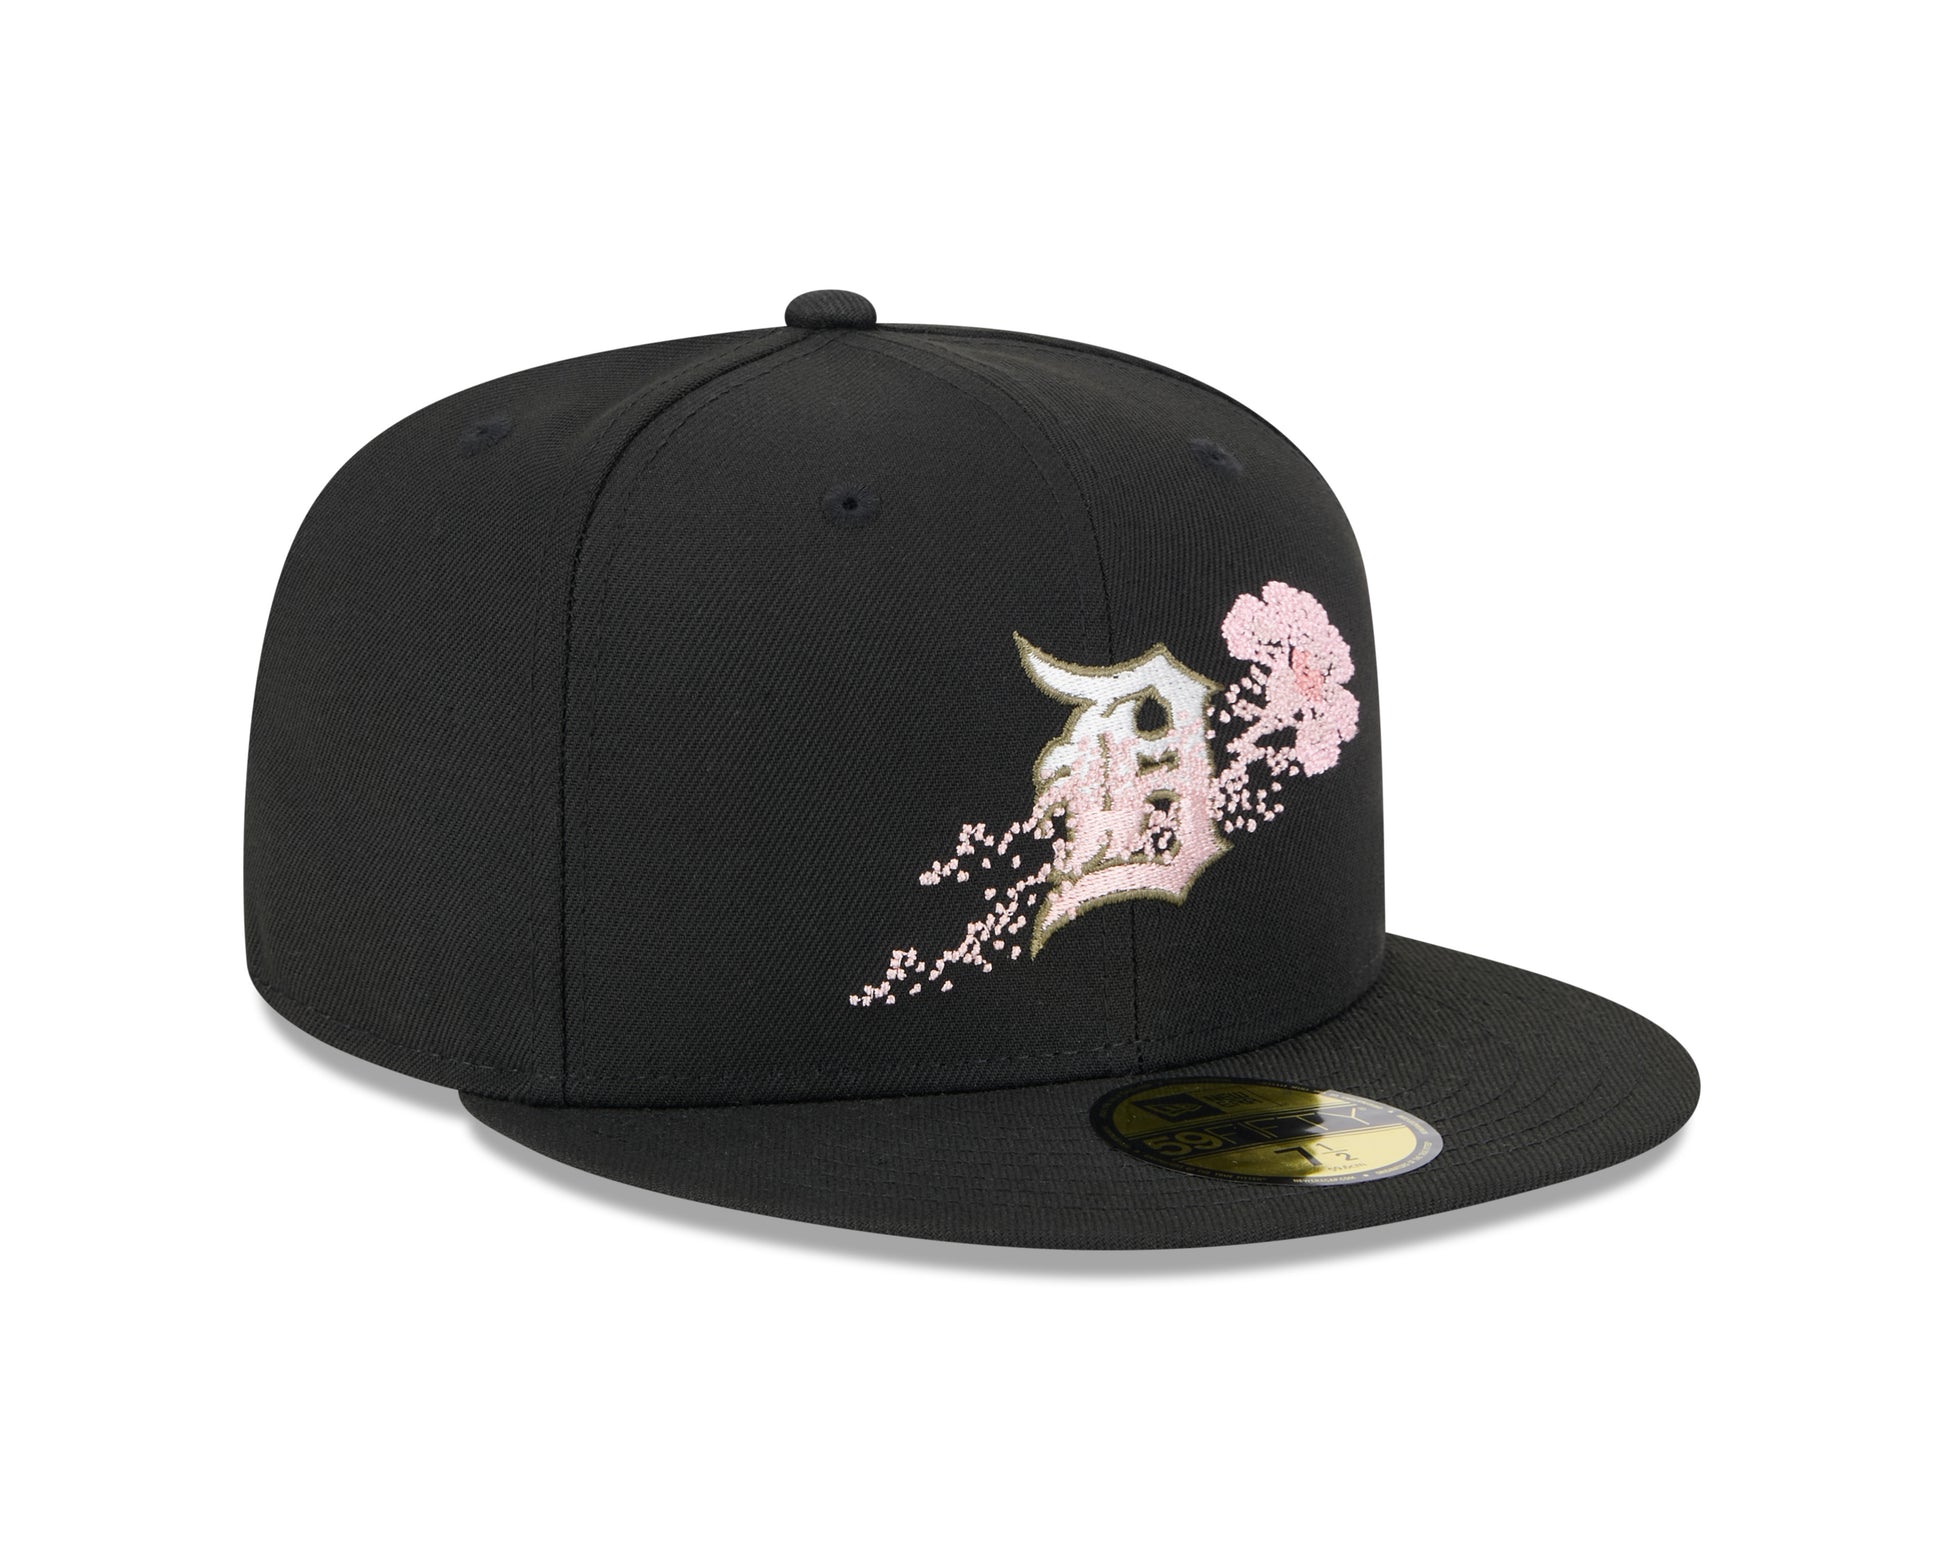 New Era - 59fifty Fitted Cap - Detroit Tigers - DOTTED FLORAL - Black - Headz Up 